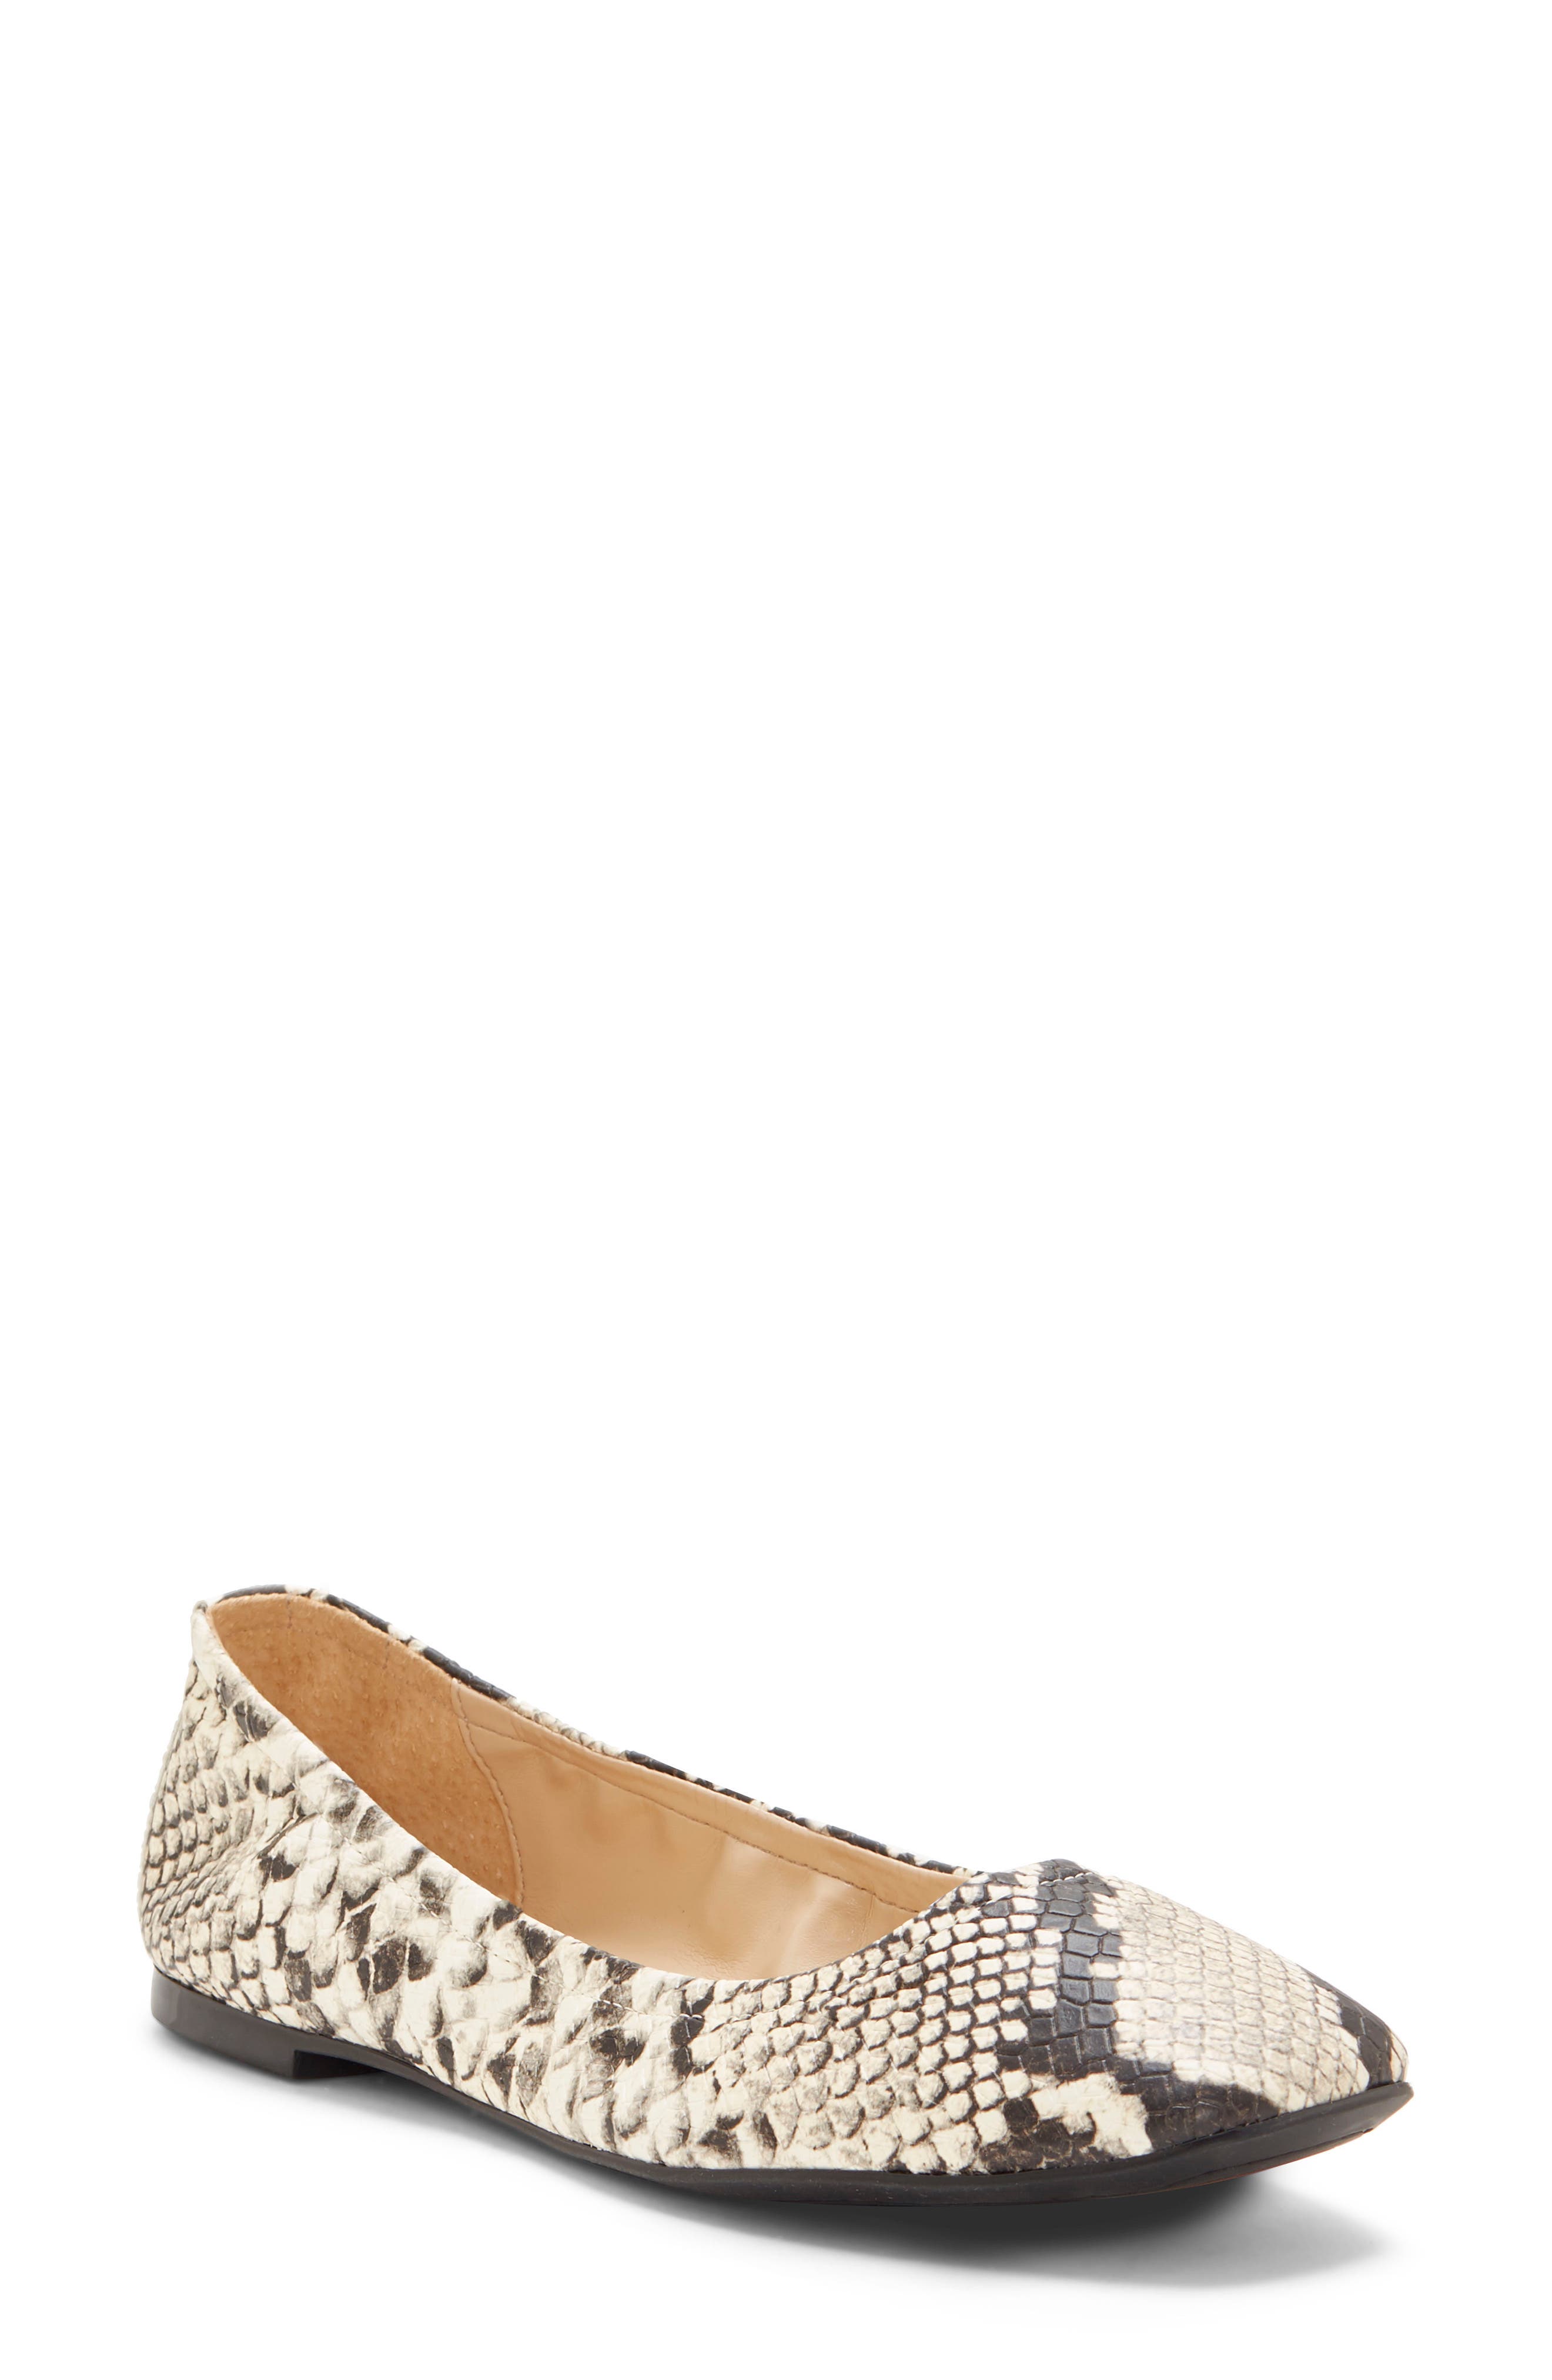 vince camuto flats nordstrom